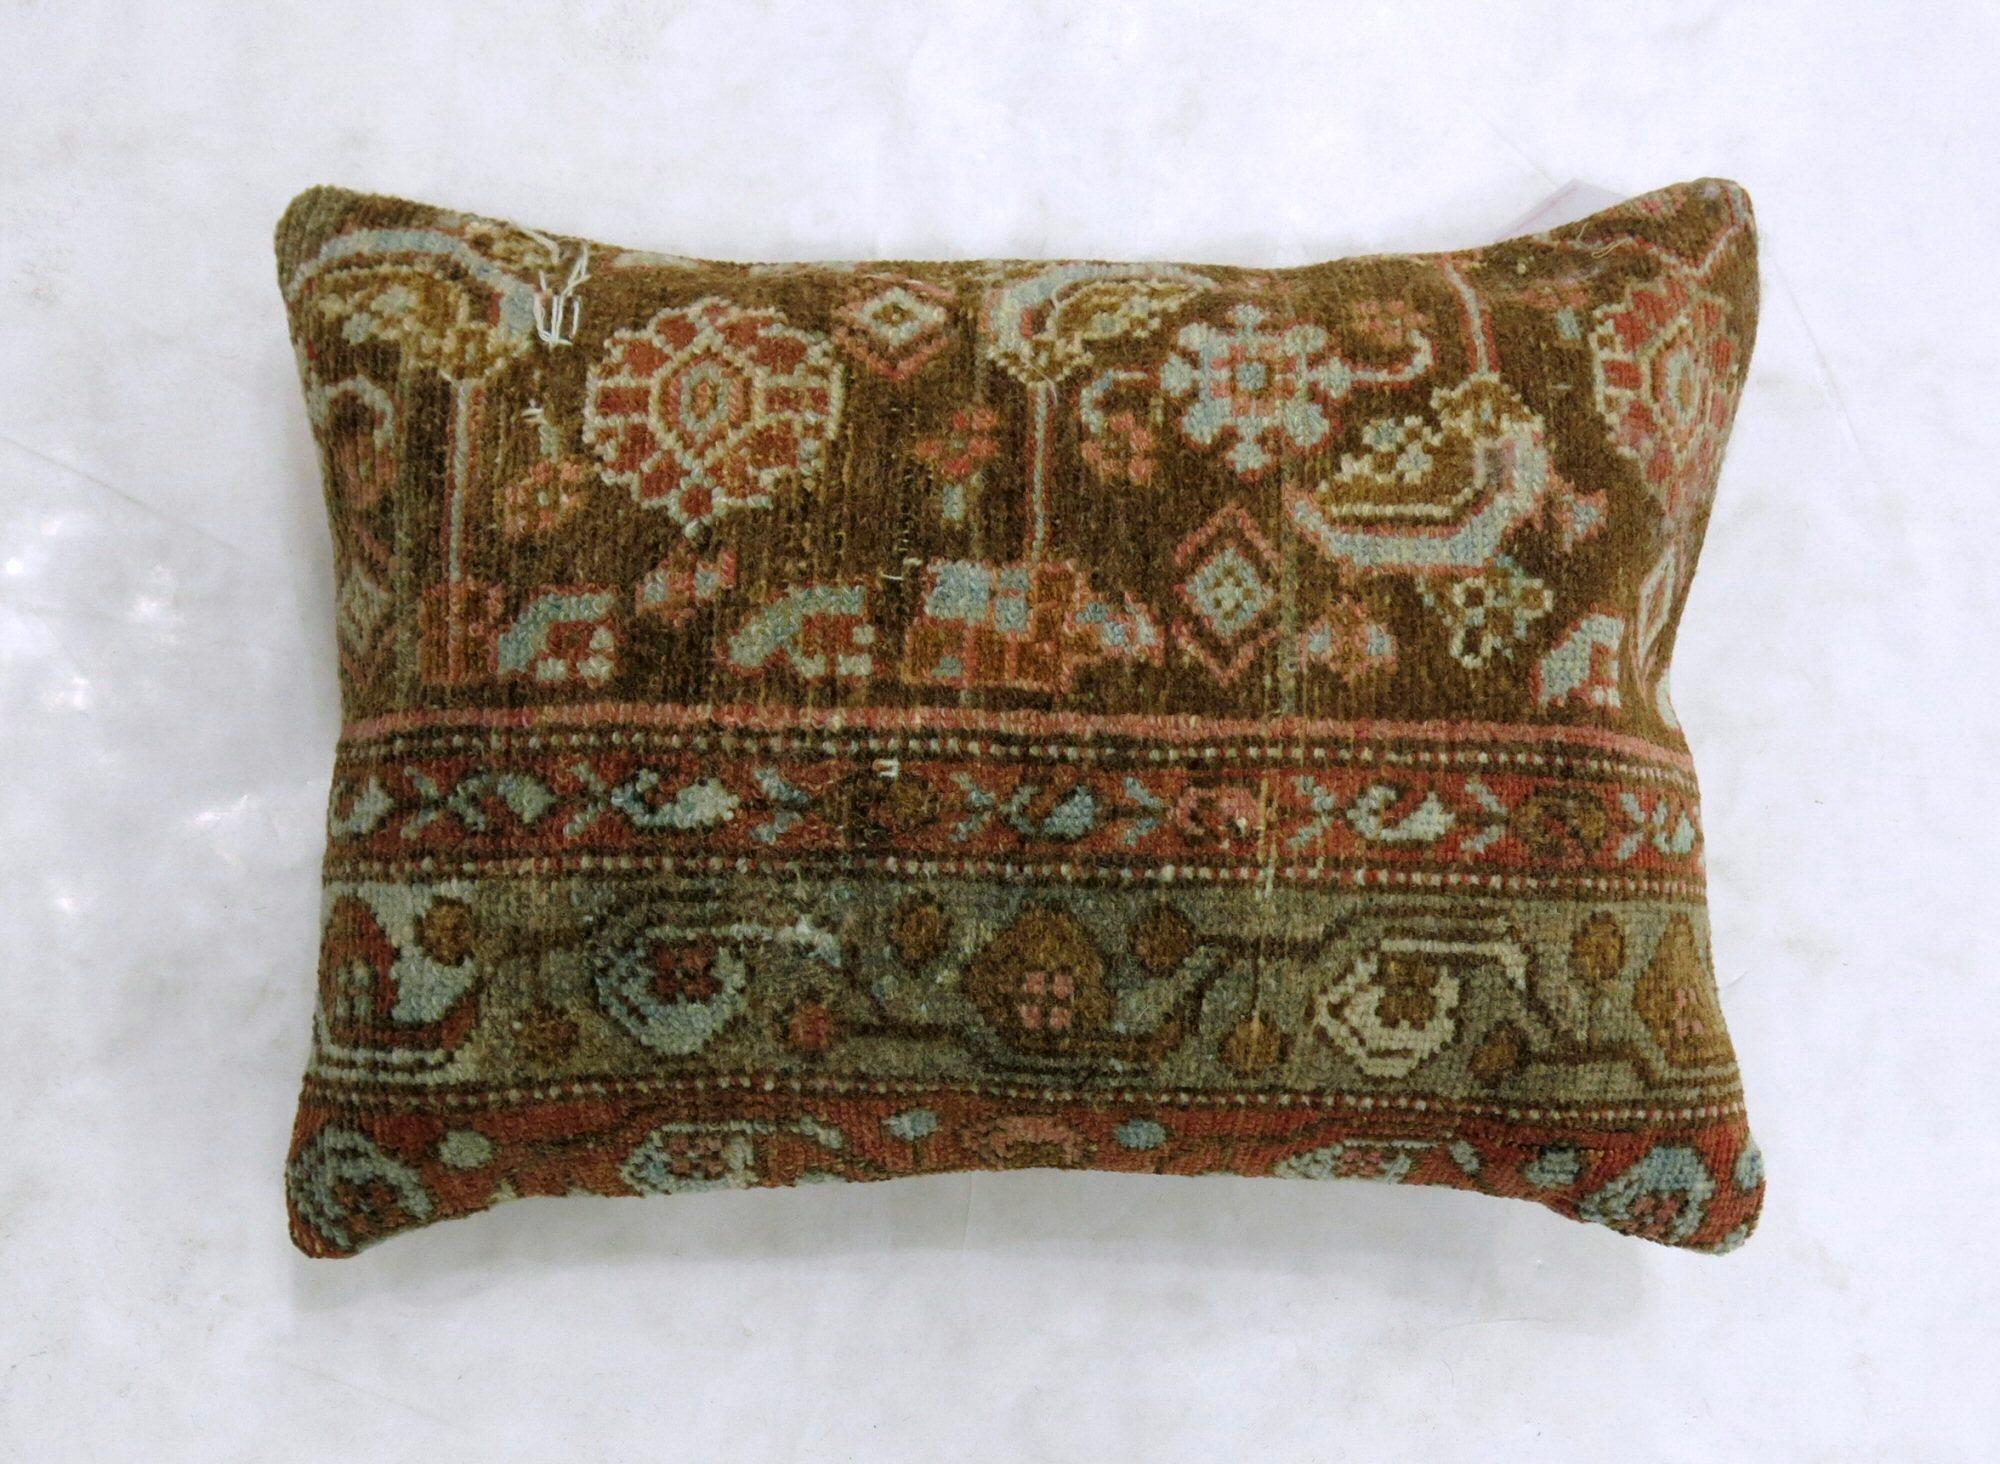 Pillow made from a Persian Malayer rug in brown and rust.

Measures: 16